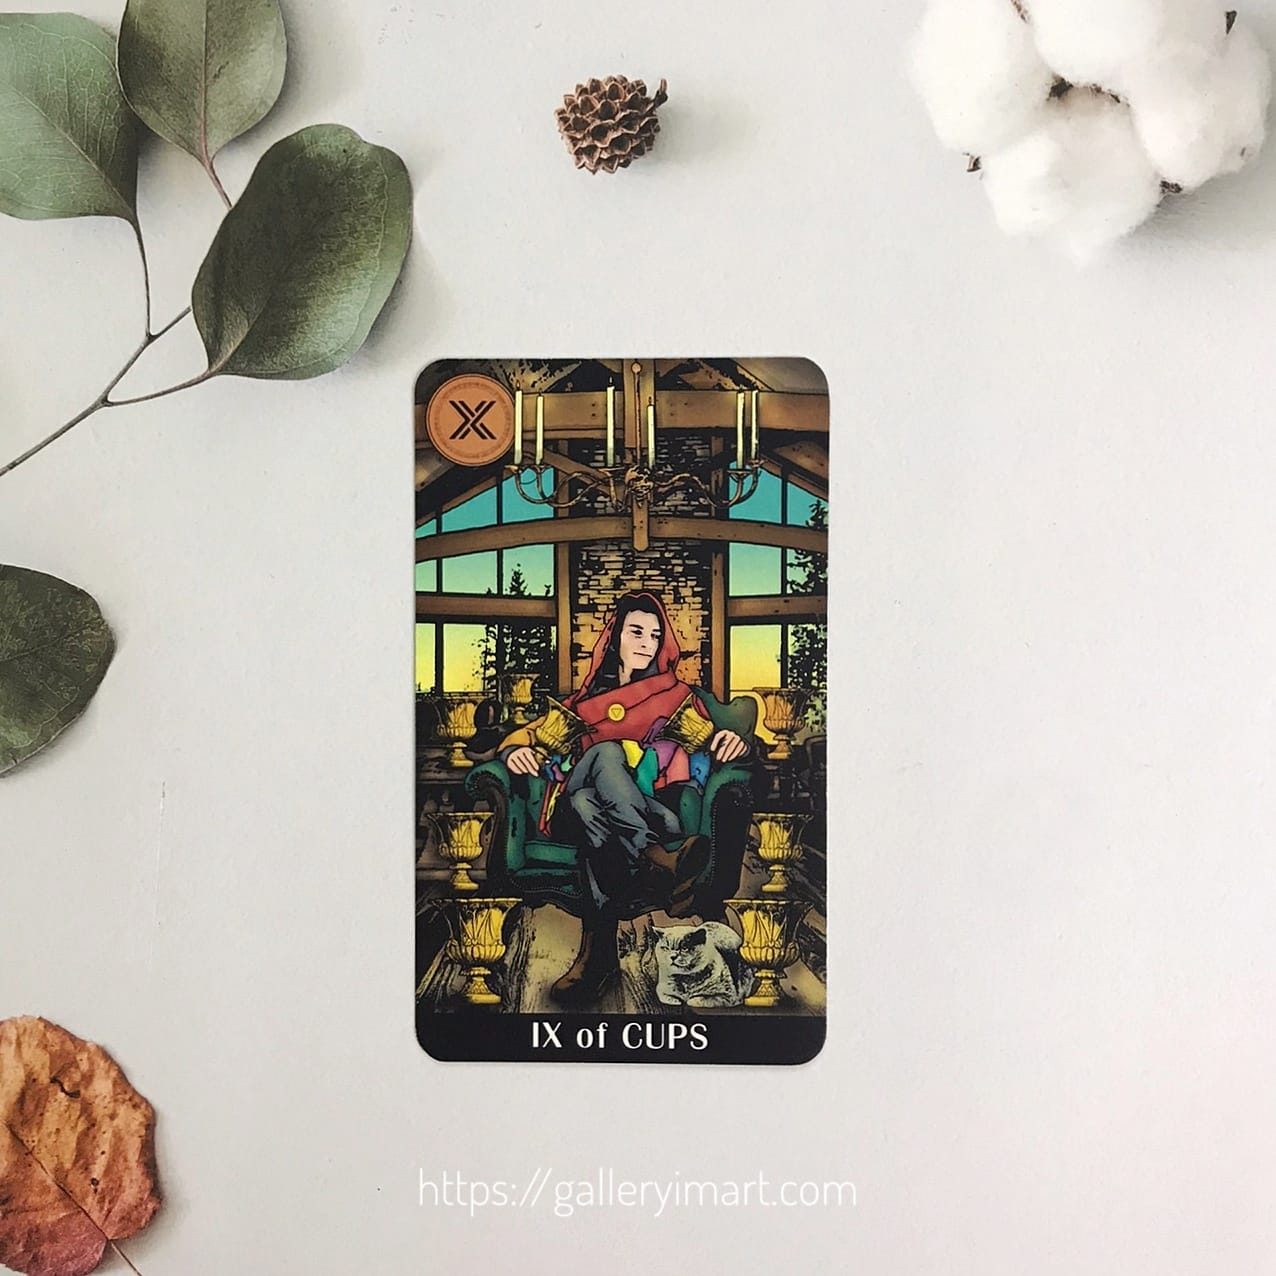 Nine of Cups Meaning